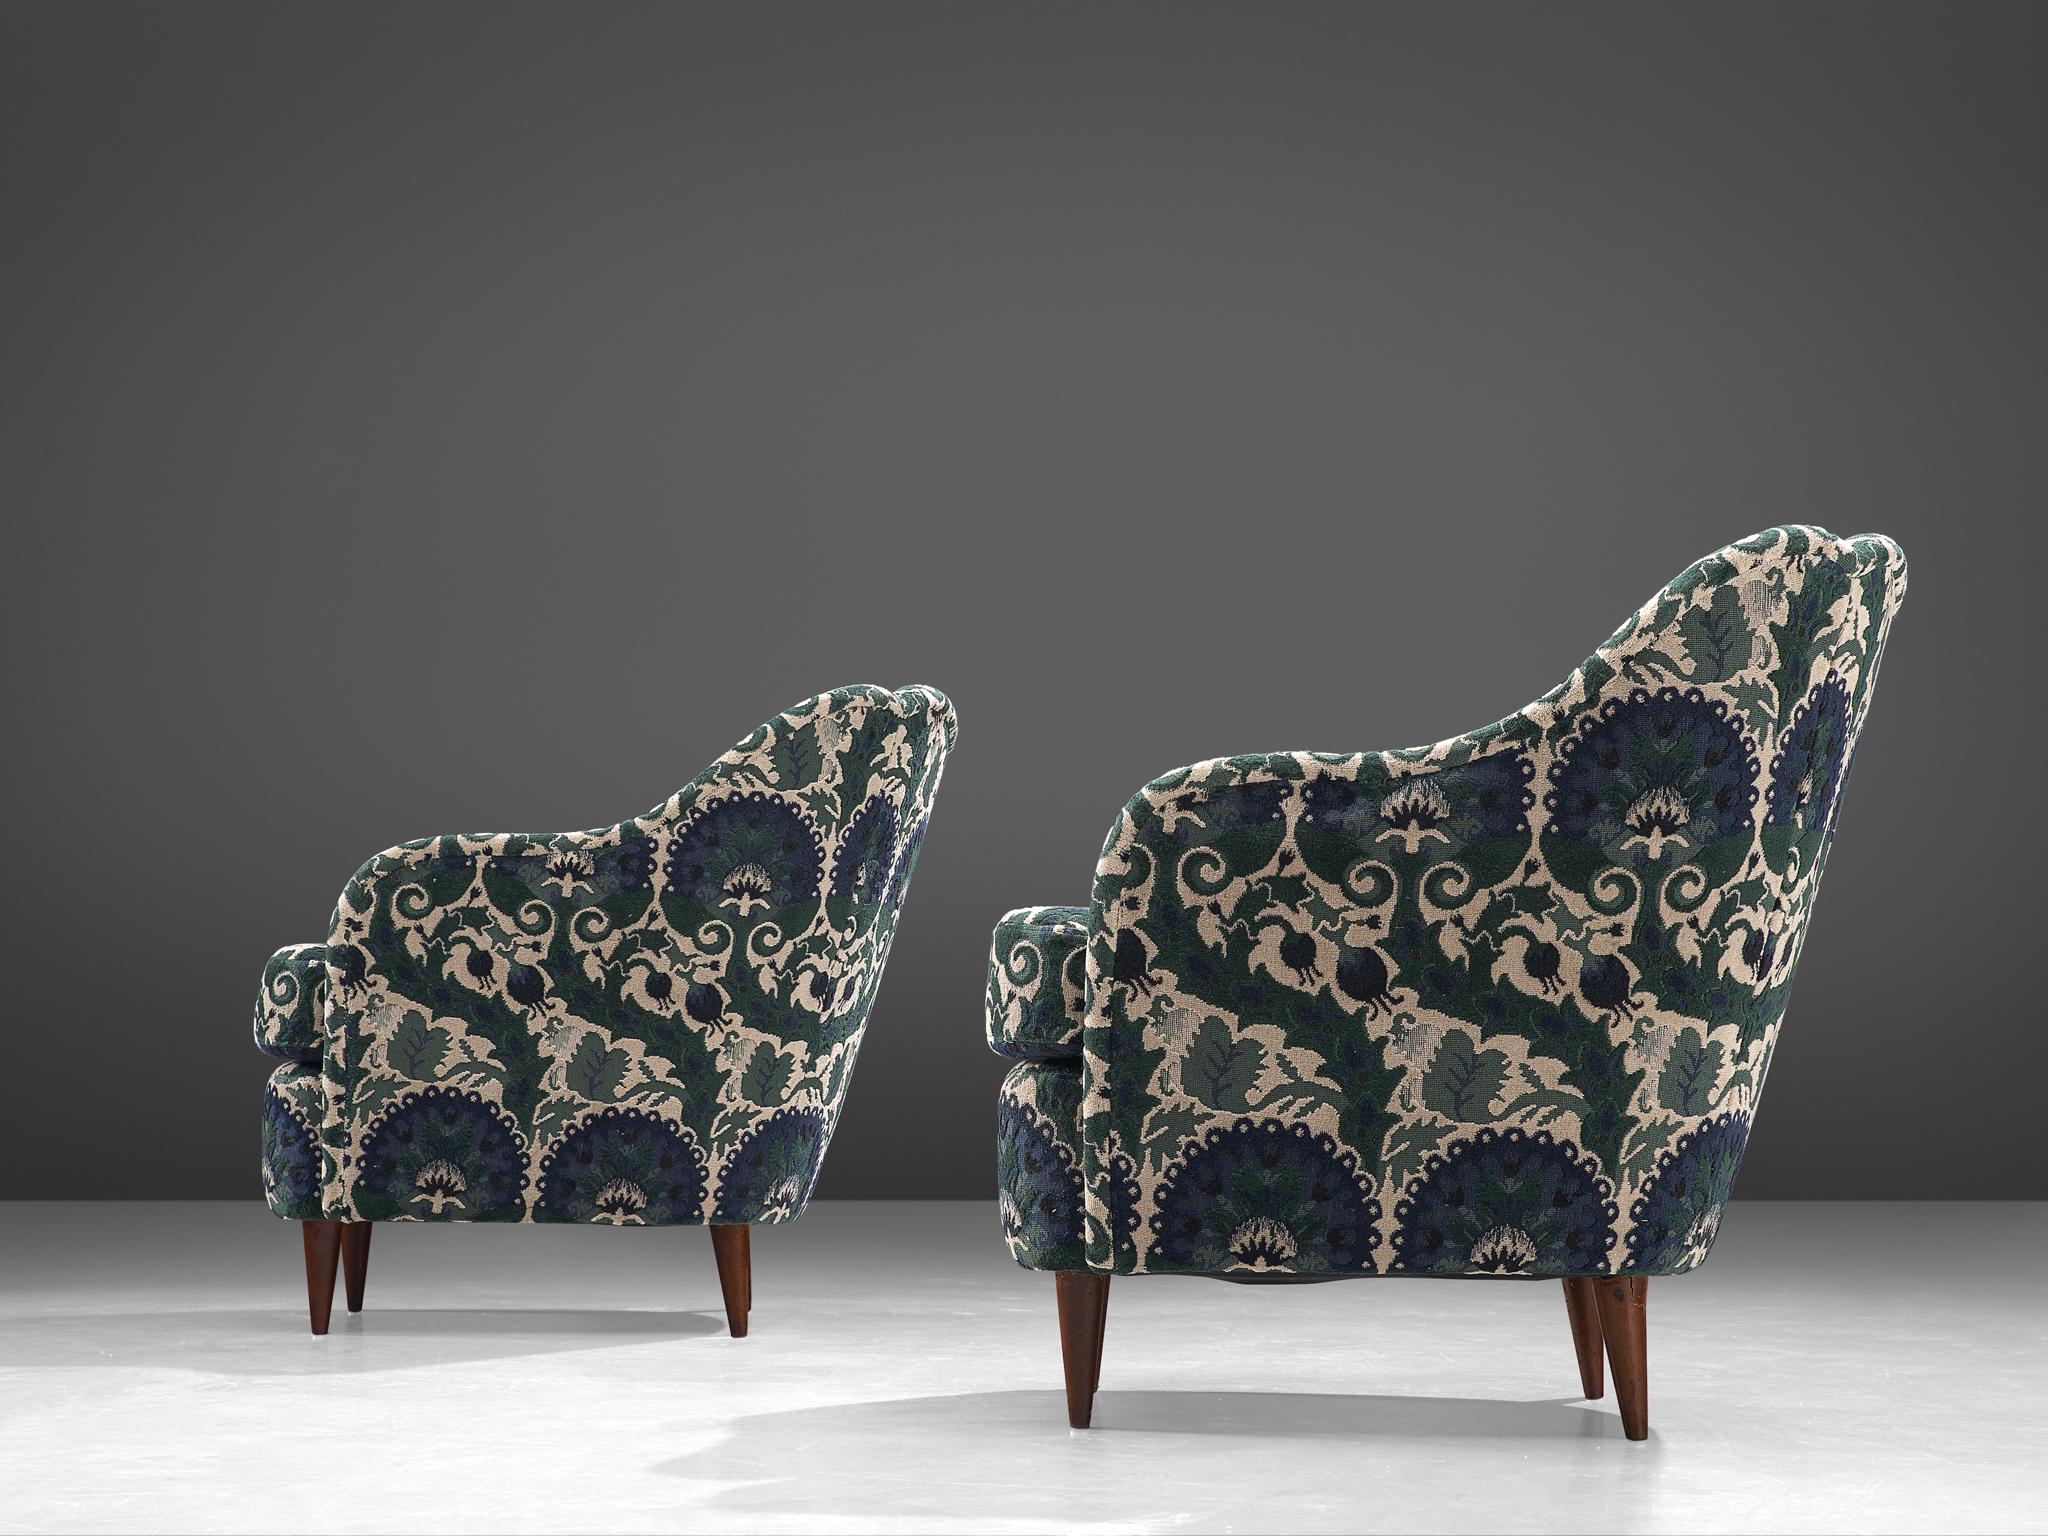 Mid-20th Century Pair of Lounge Chairs in ZAK+FOX ‘Fantasma’ Collection 2020 Upholstery